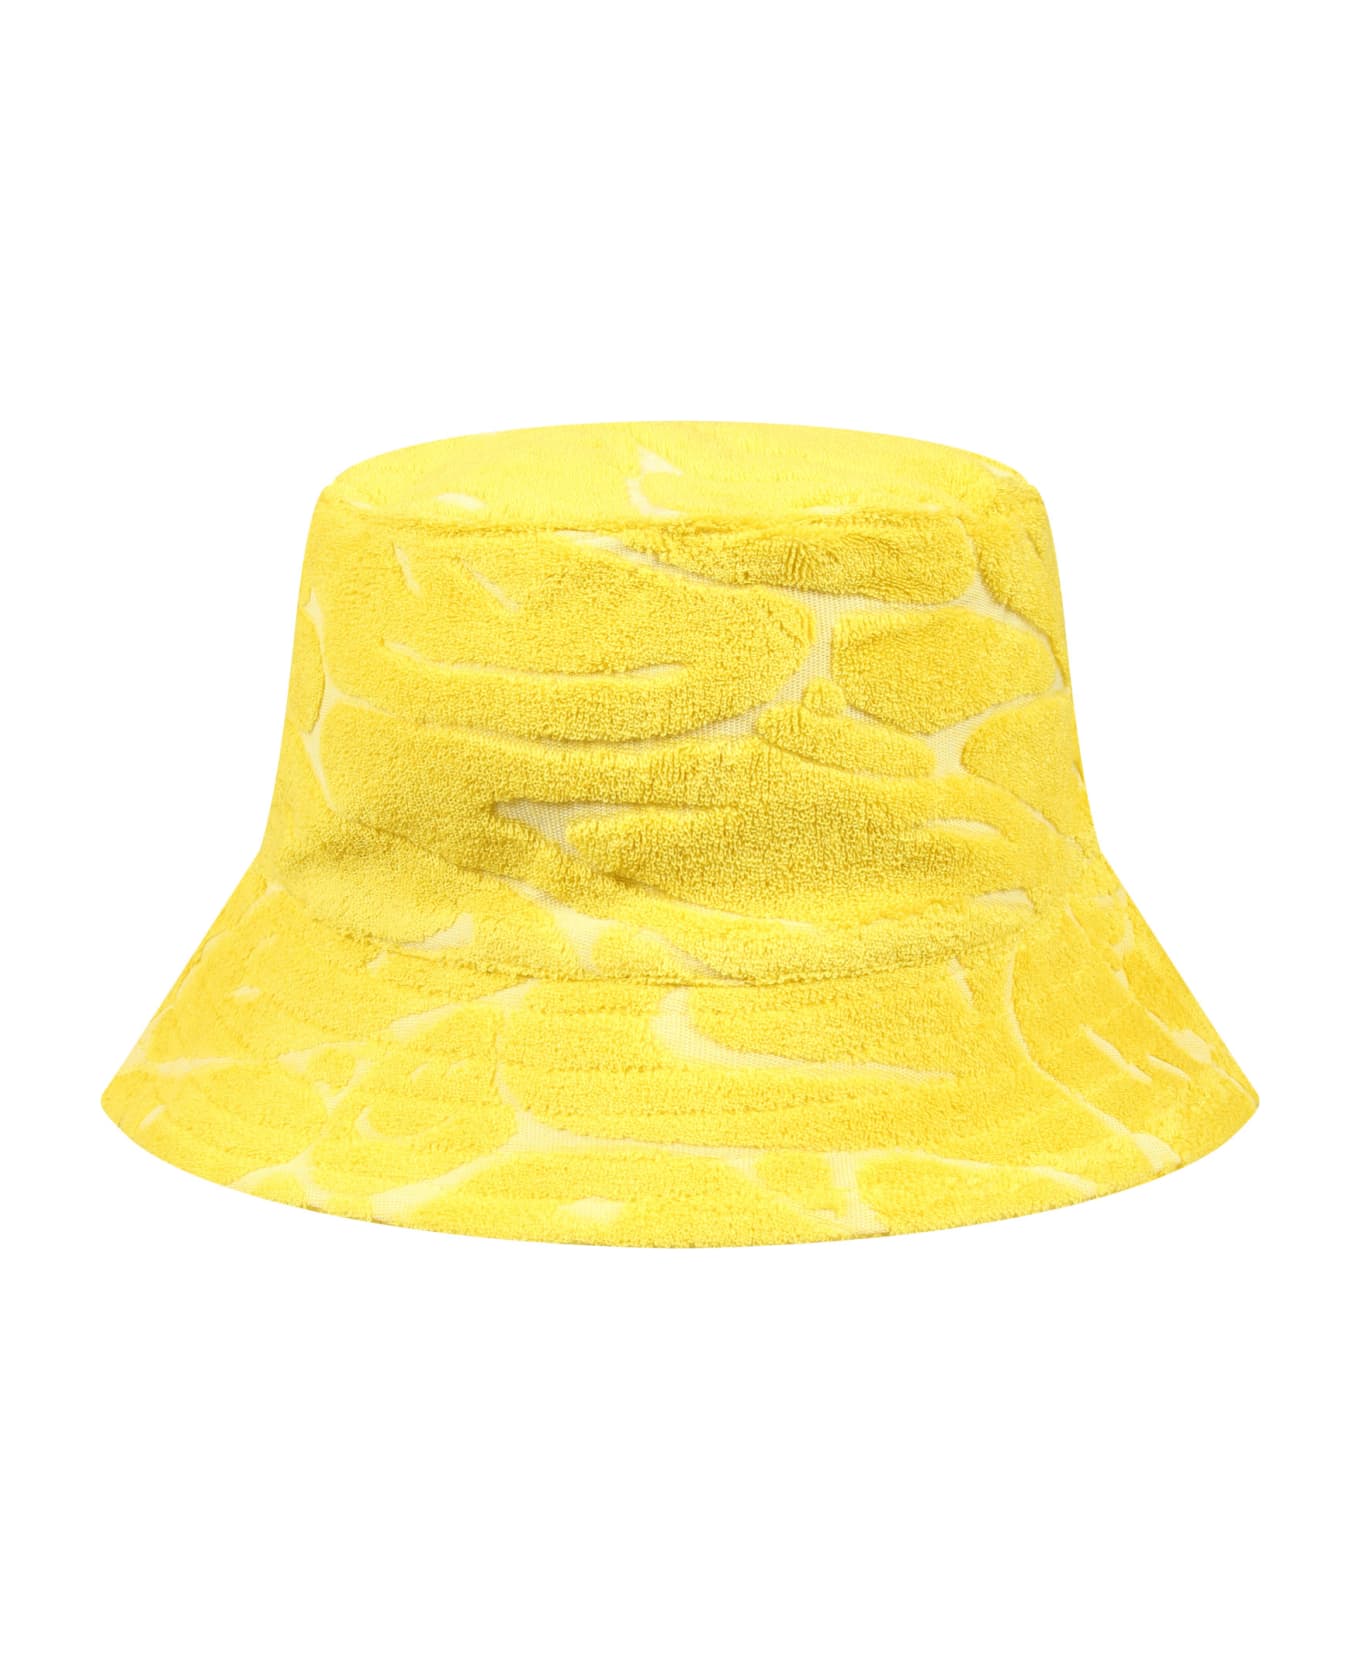 Molo Yellow Cloche For Kids With Smiley - Yellow アクセサリー＆ギフト